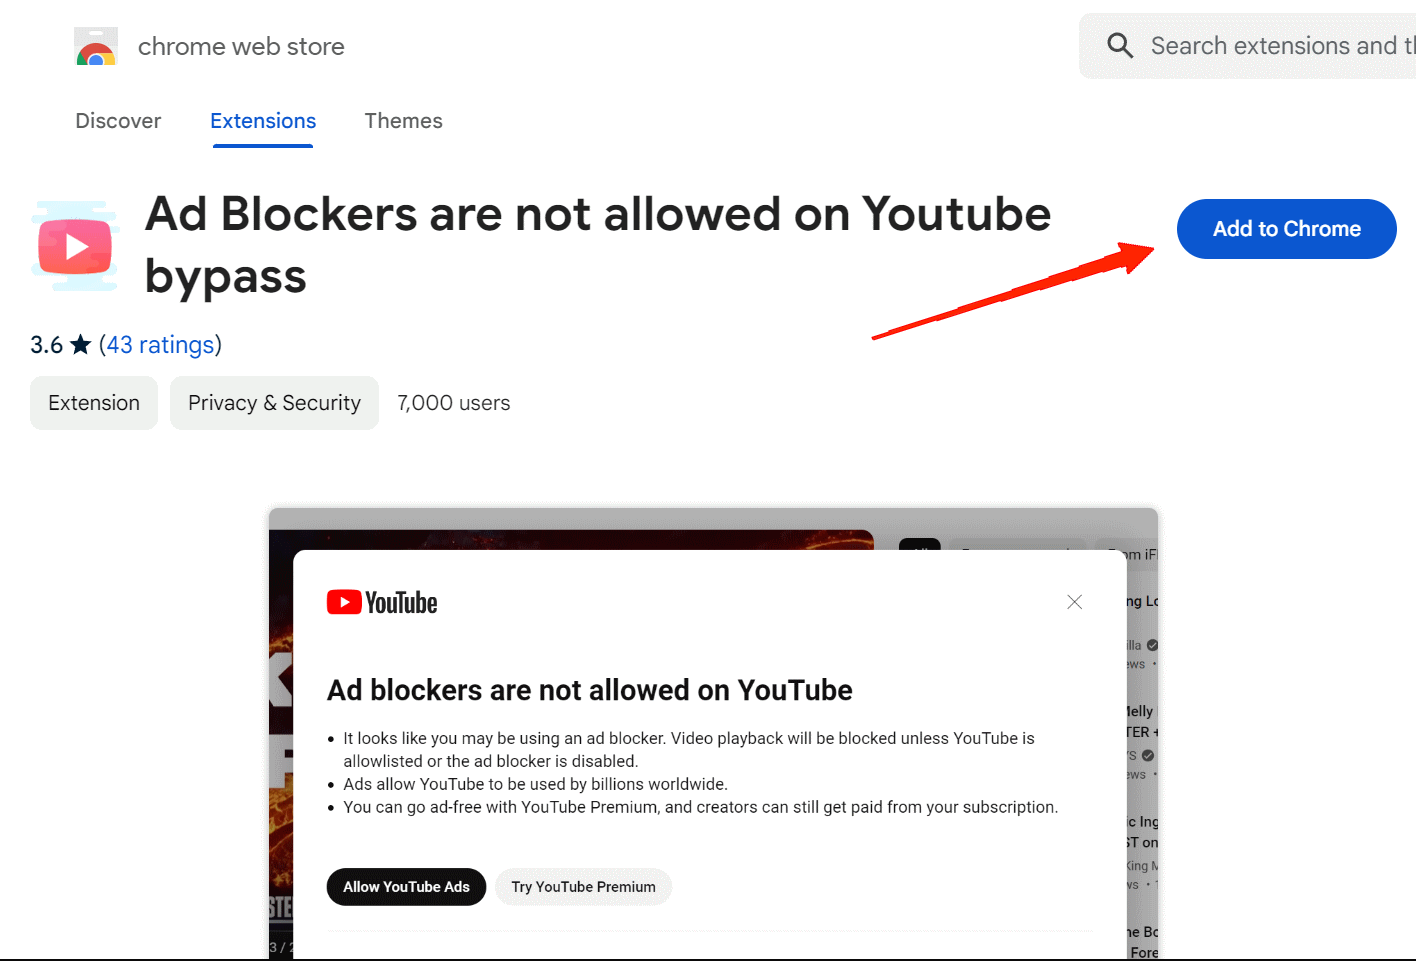 Open Google Chrome and search "Ad blockers are not allowed on YouTube bypass".